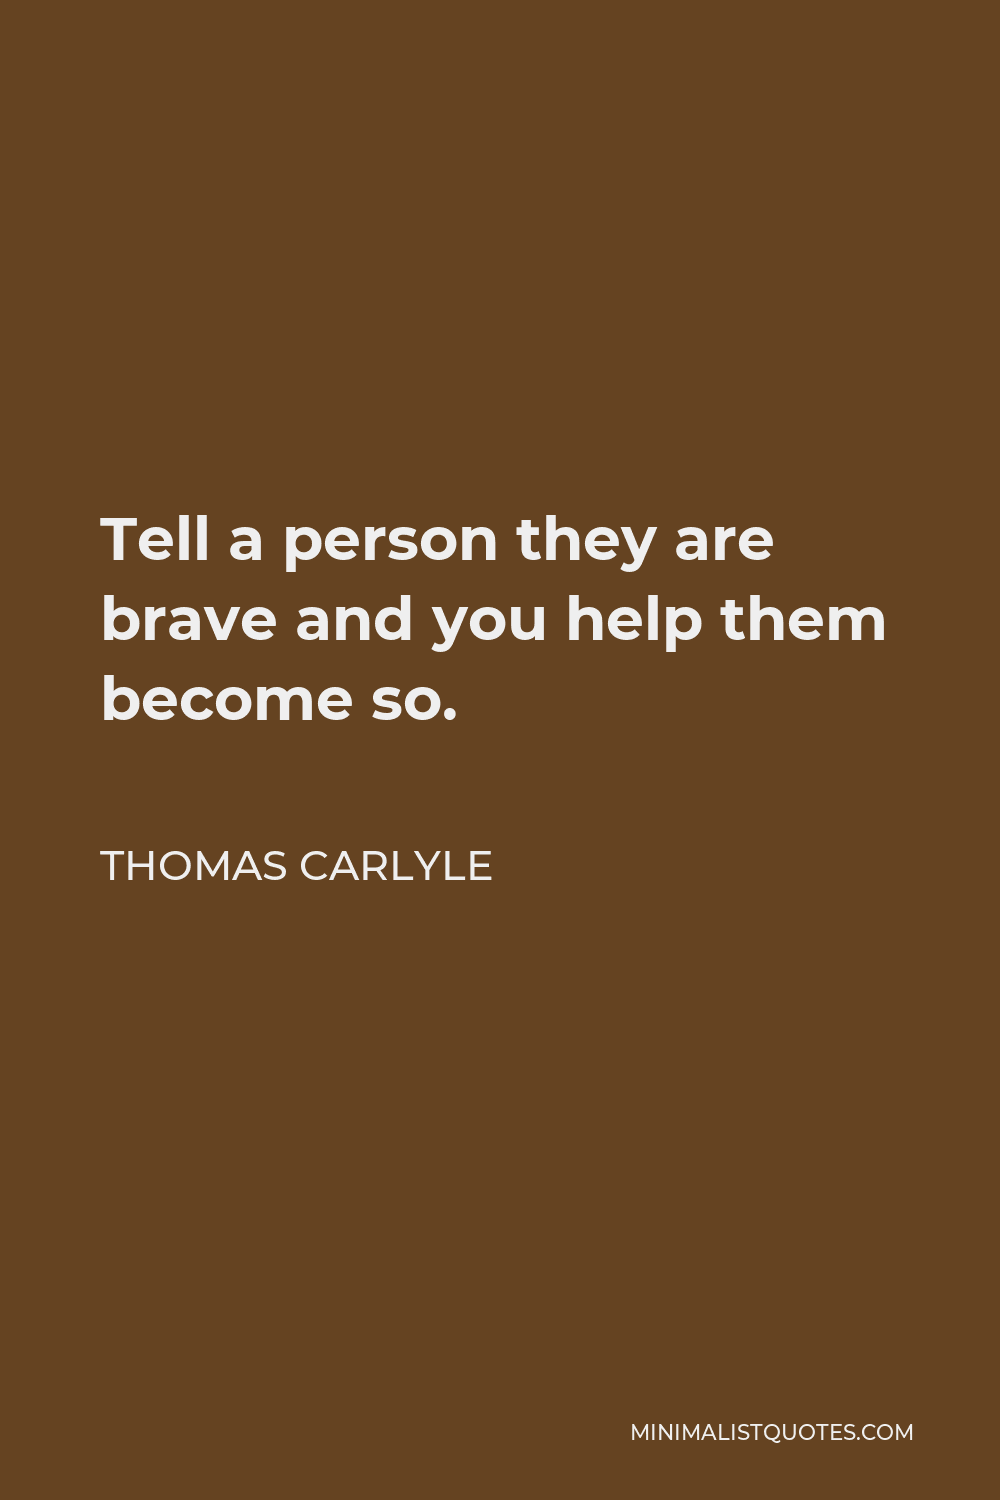 Thomas Carlyle Quote - Tell a person they are brave and you help them become so.